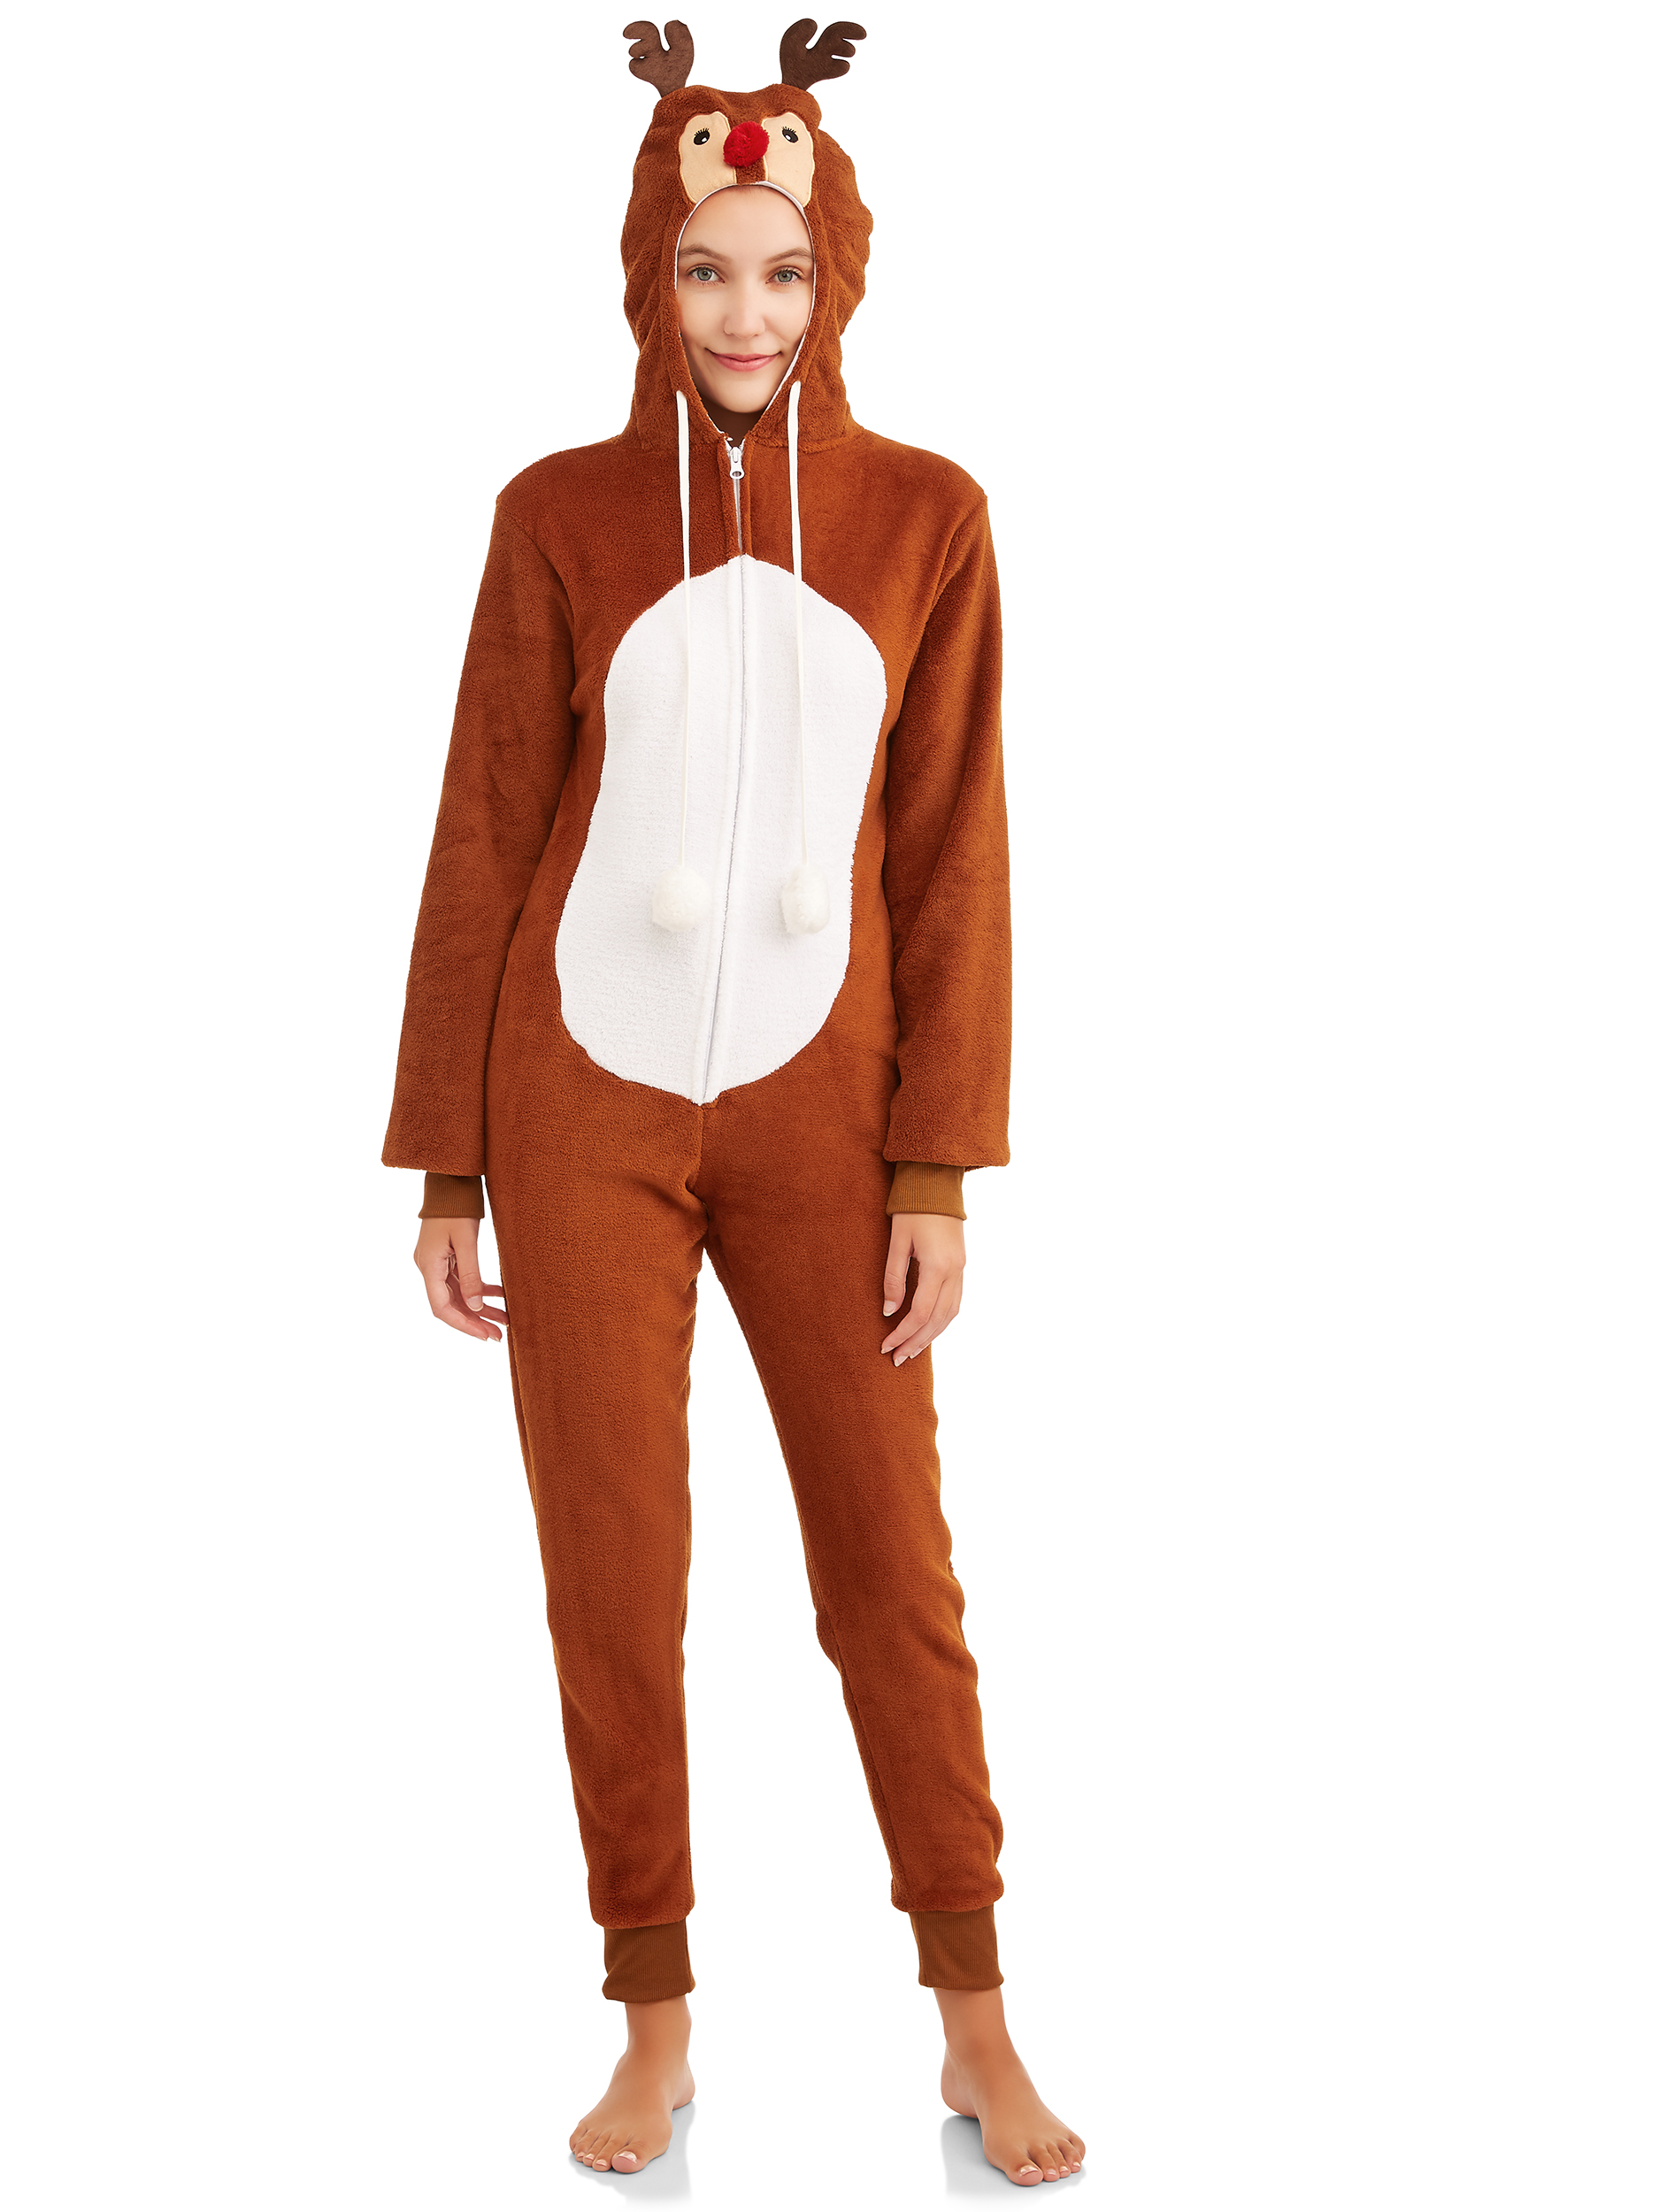 The Great Christmas Women's Christmas Edition Plush Hooded One Piece Union Suit - image 1 of 3